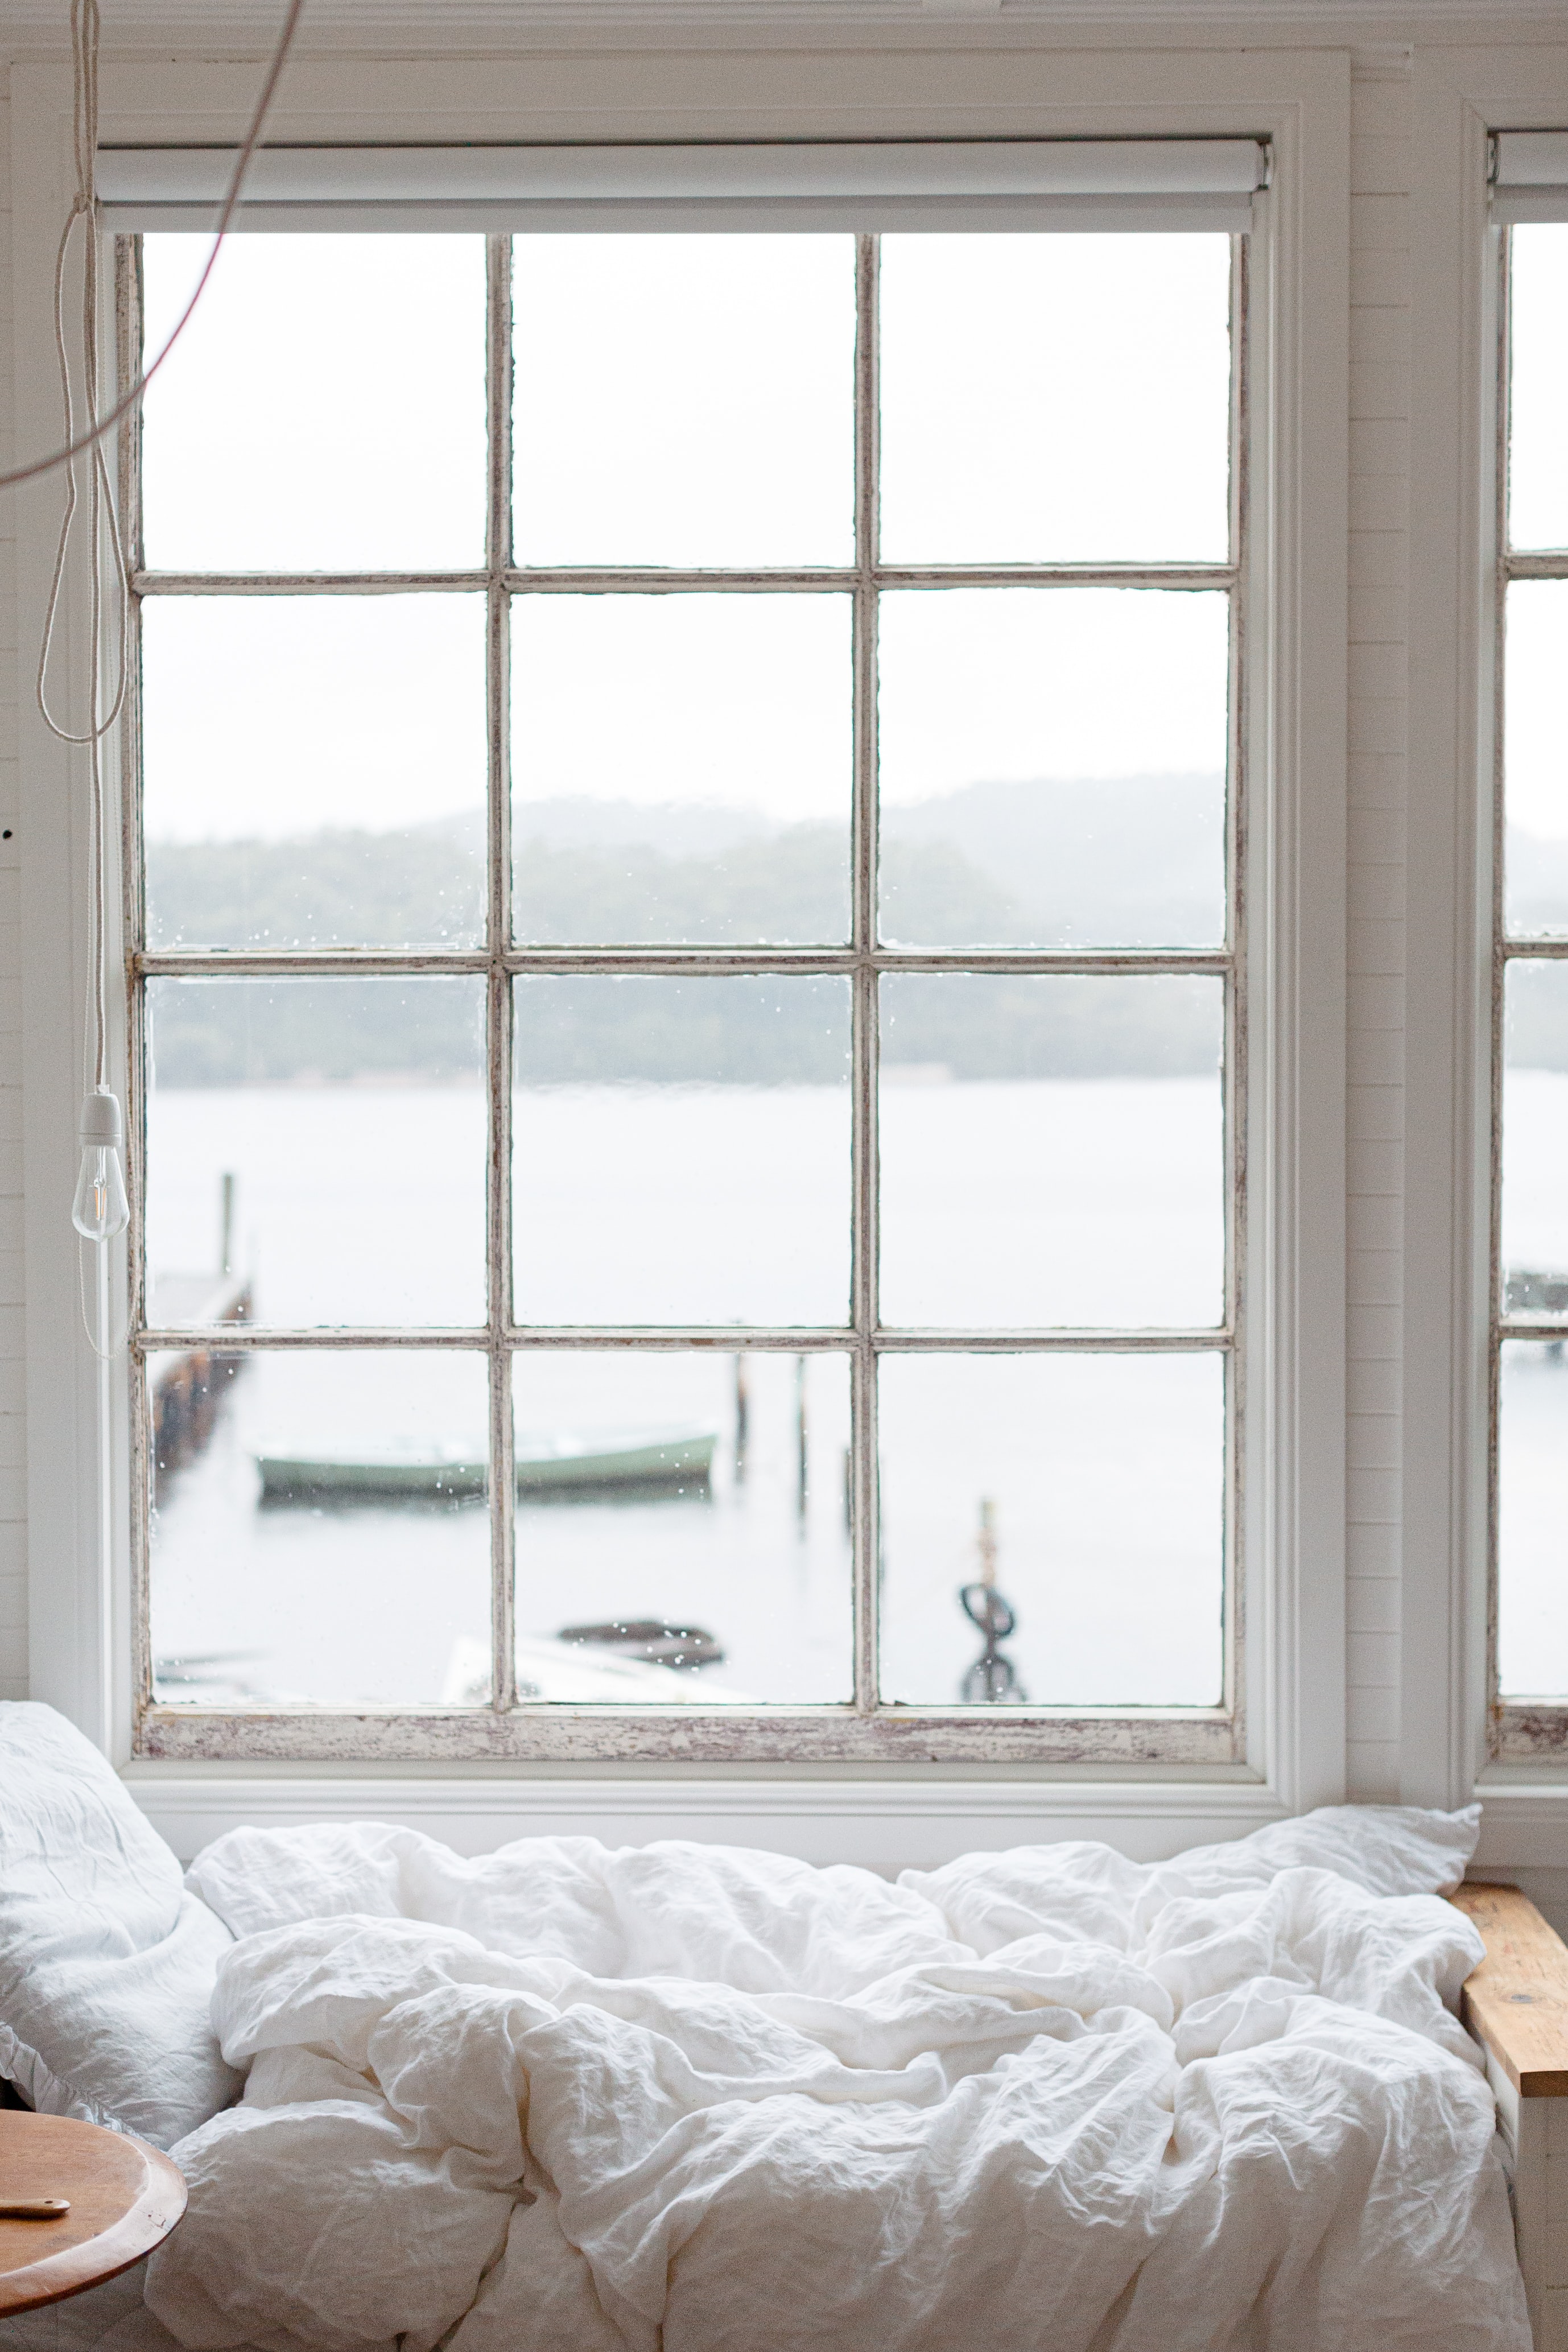 Clean white bed next to a window overlooking a harbour